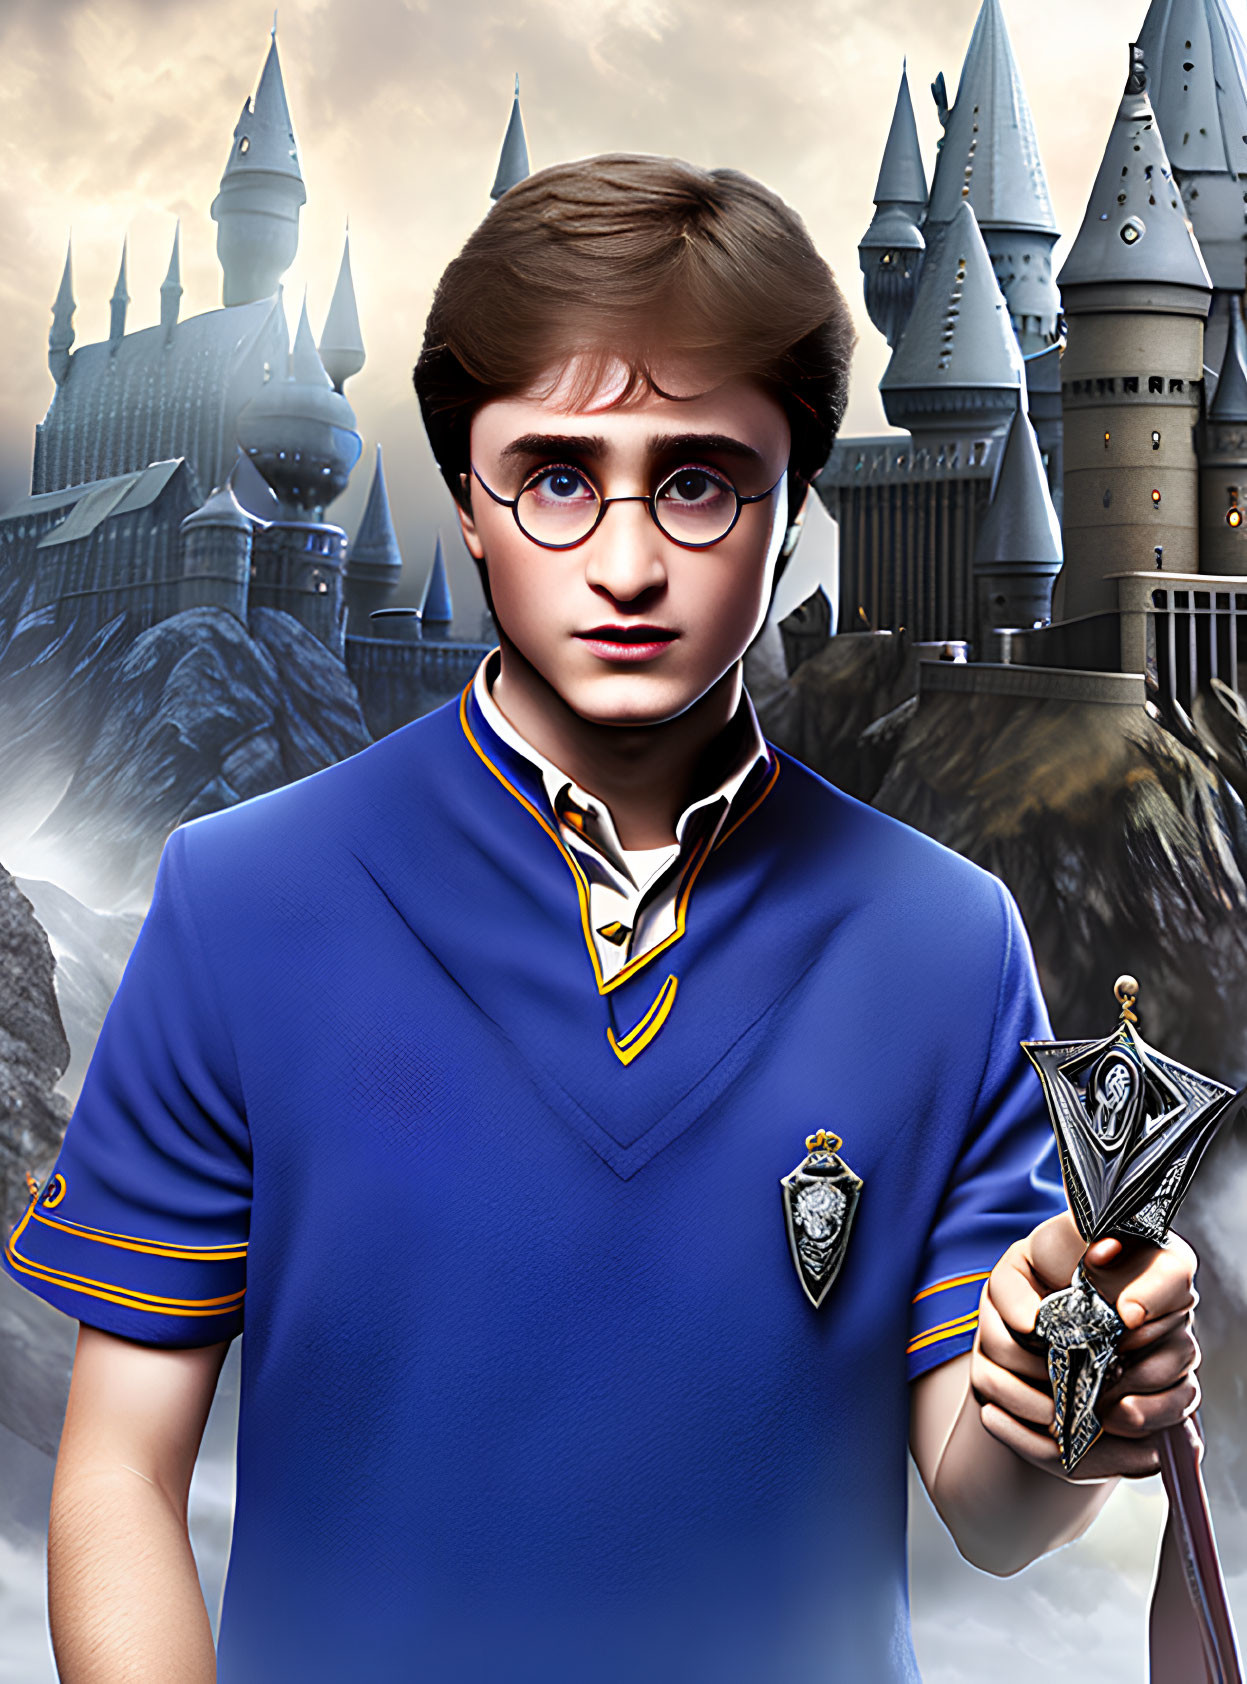 Young wizard in glasses with wand against castle backdrop